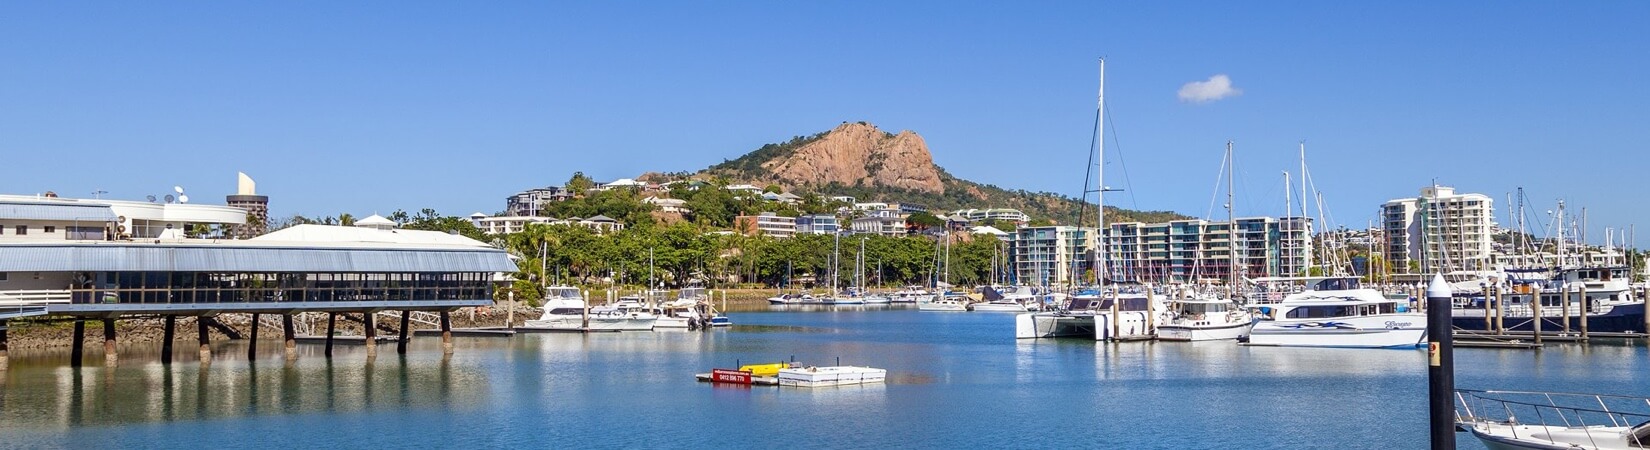 DIVING INTO LOCAL HISTORY:  The Townsville Sailing Club